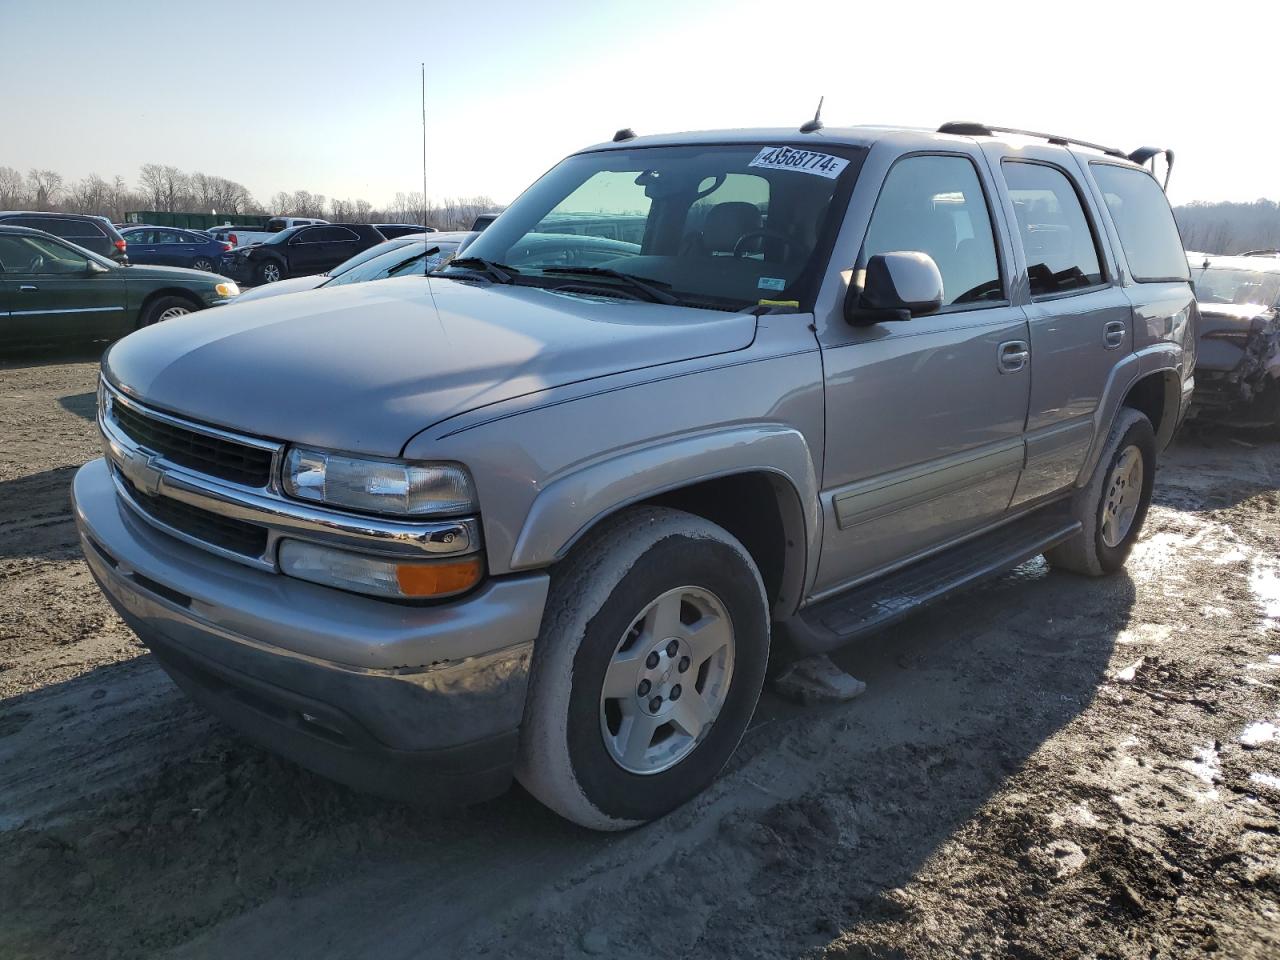 vin: 1GNEC13Z15J100131 1GNEC13Z15J100131 2005 chevrolet tahoe 5300 for Sale in 62205 1001, Il - Southern Illinois, Cahokia Heights, USA